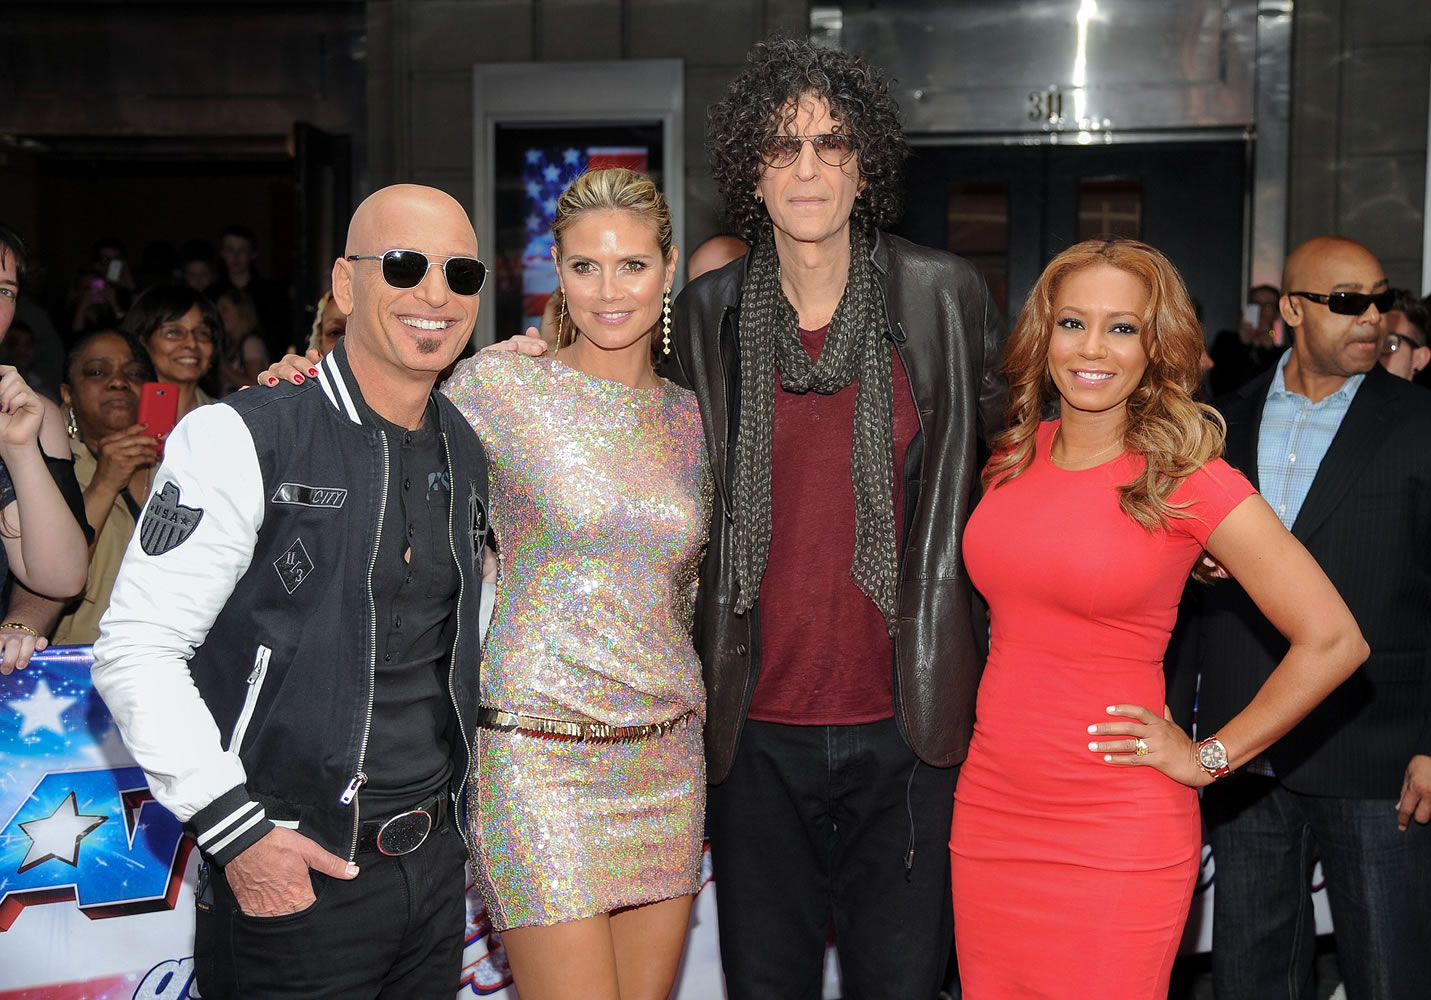 Celebrity judges Howie Mandel, from left, Heidi Klum, Howard Stern and Melanie &quot;Mel B.&quot; Brown return for another season of &quot;America's Got Talent.&quot;